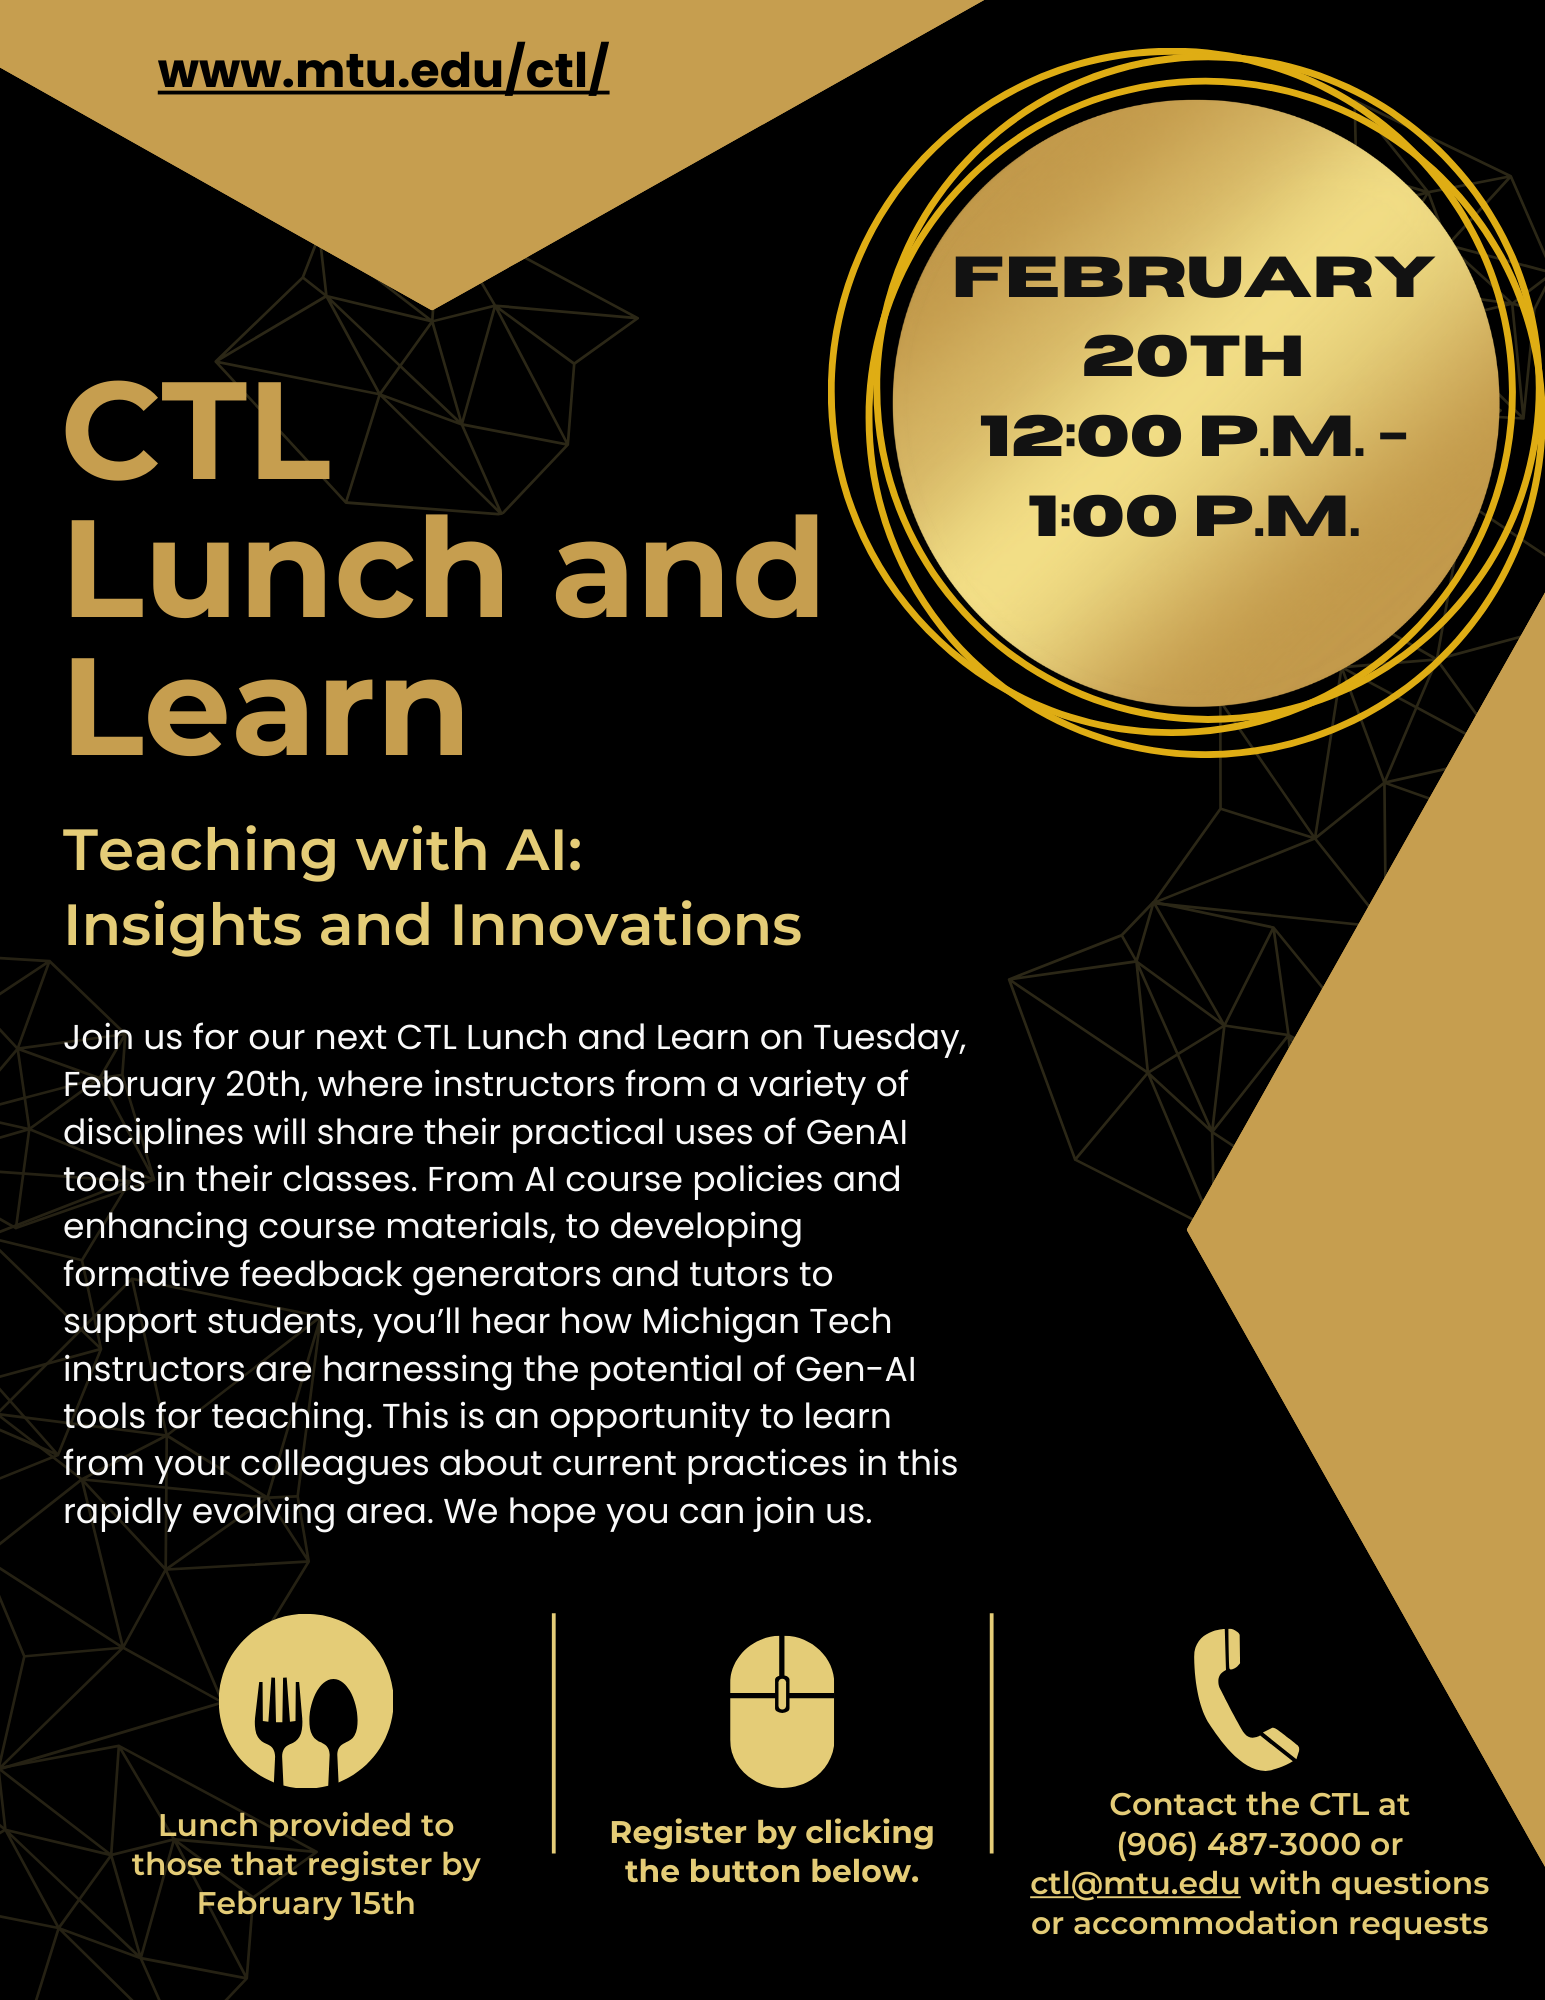 Join us for our next CTL Lunch and Learn on Tuesday,
February 20th, where instructors from a variety of
disciplines will share their practical uses of GenAI
tools in their classes. From AI course policies and
enhancing course materials, to developing
formative feedback generators and tutors to
support students, you’ll hear how Michigan Tech
instructors are harnessing the potential of Gen-AI
tools for teaching. This is an opportunity to learn
from your colleagues about current practices in this
rapidly evolving area. We hope you can join us.